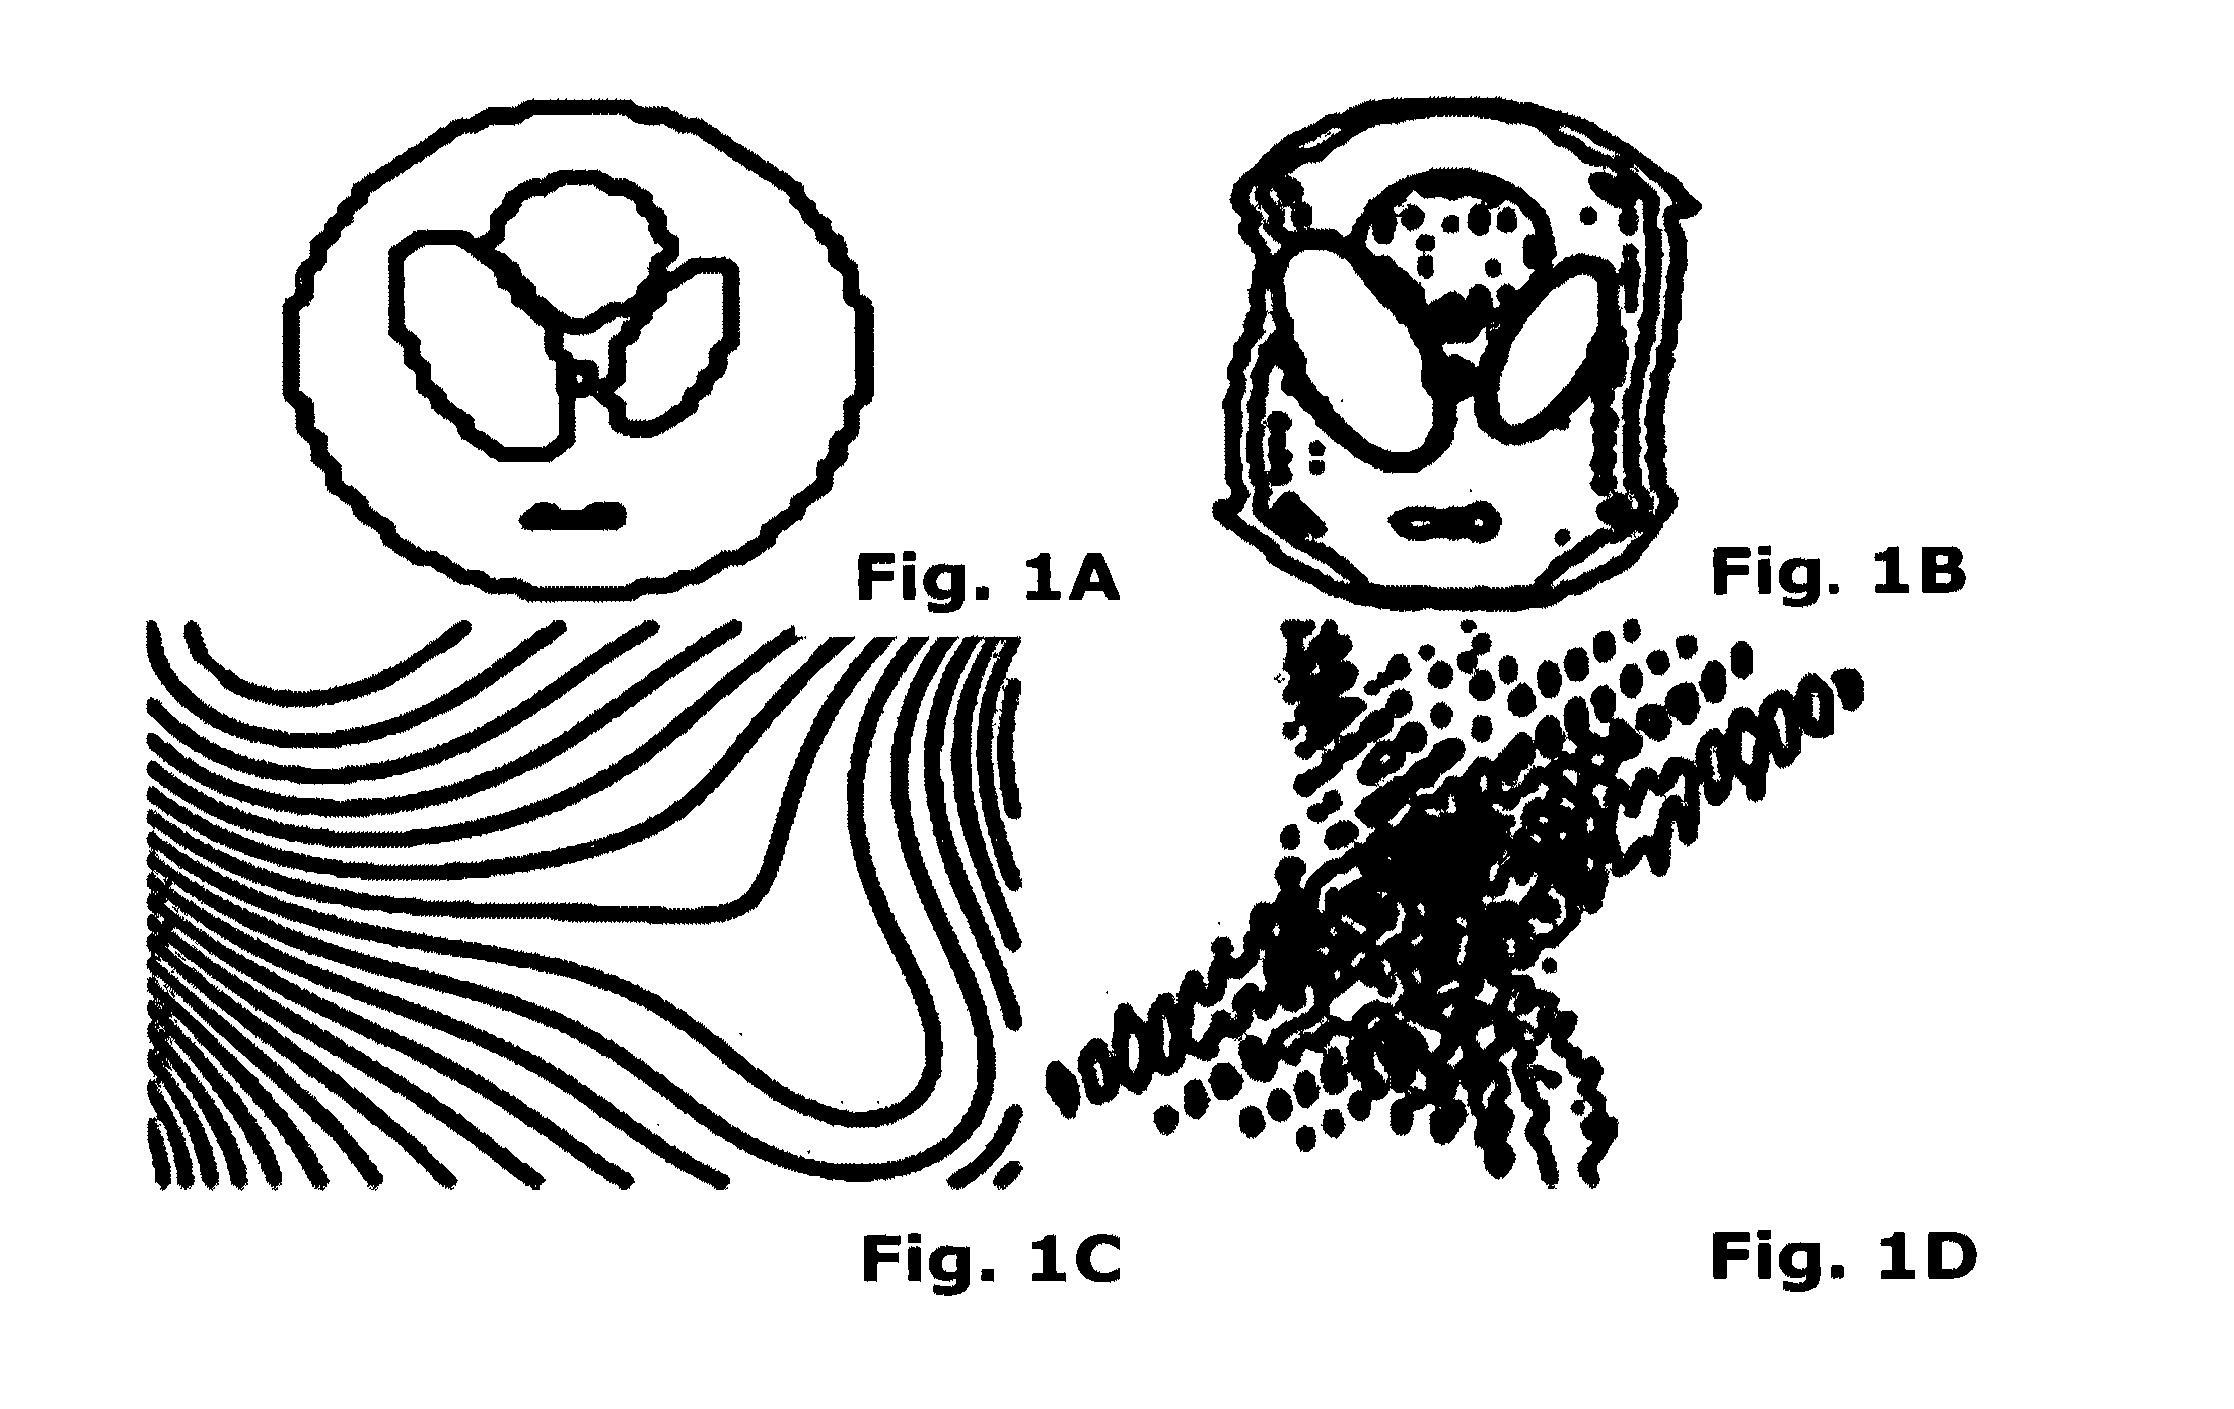 Method of MR (=magnetic resonance) with spatial encoding to generate an image or spectroscopic data